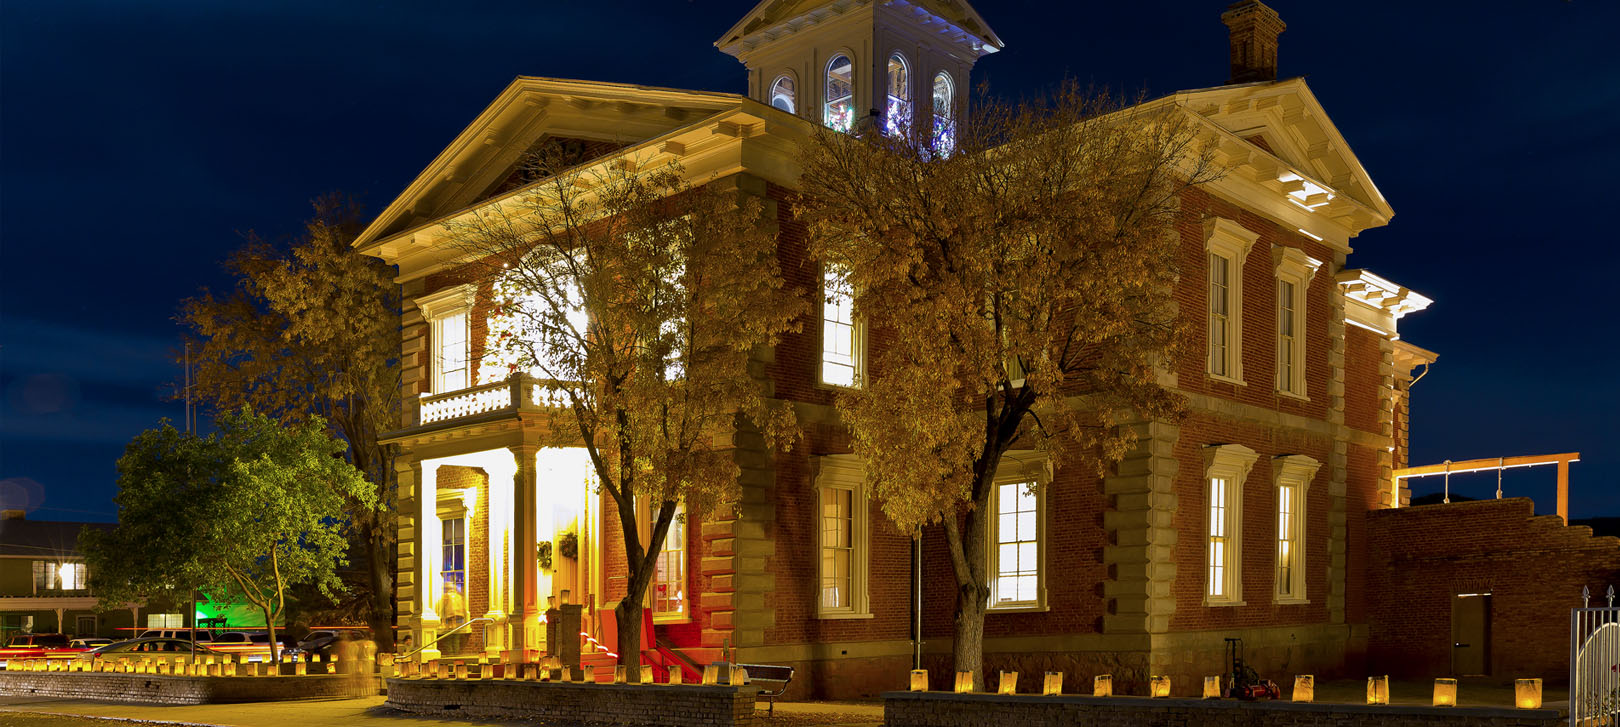 A nighttime view of the Tombstone Courthouse, with lights shining through windows